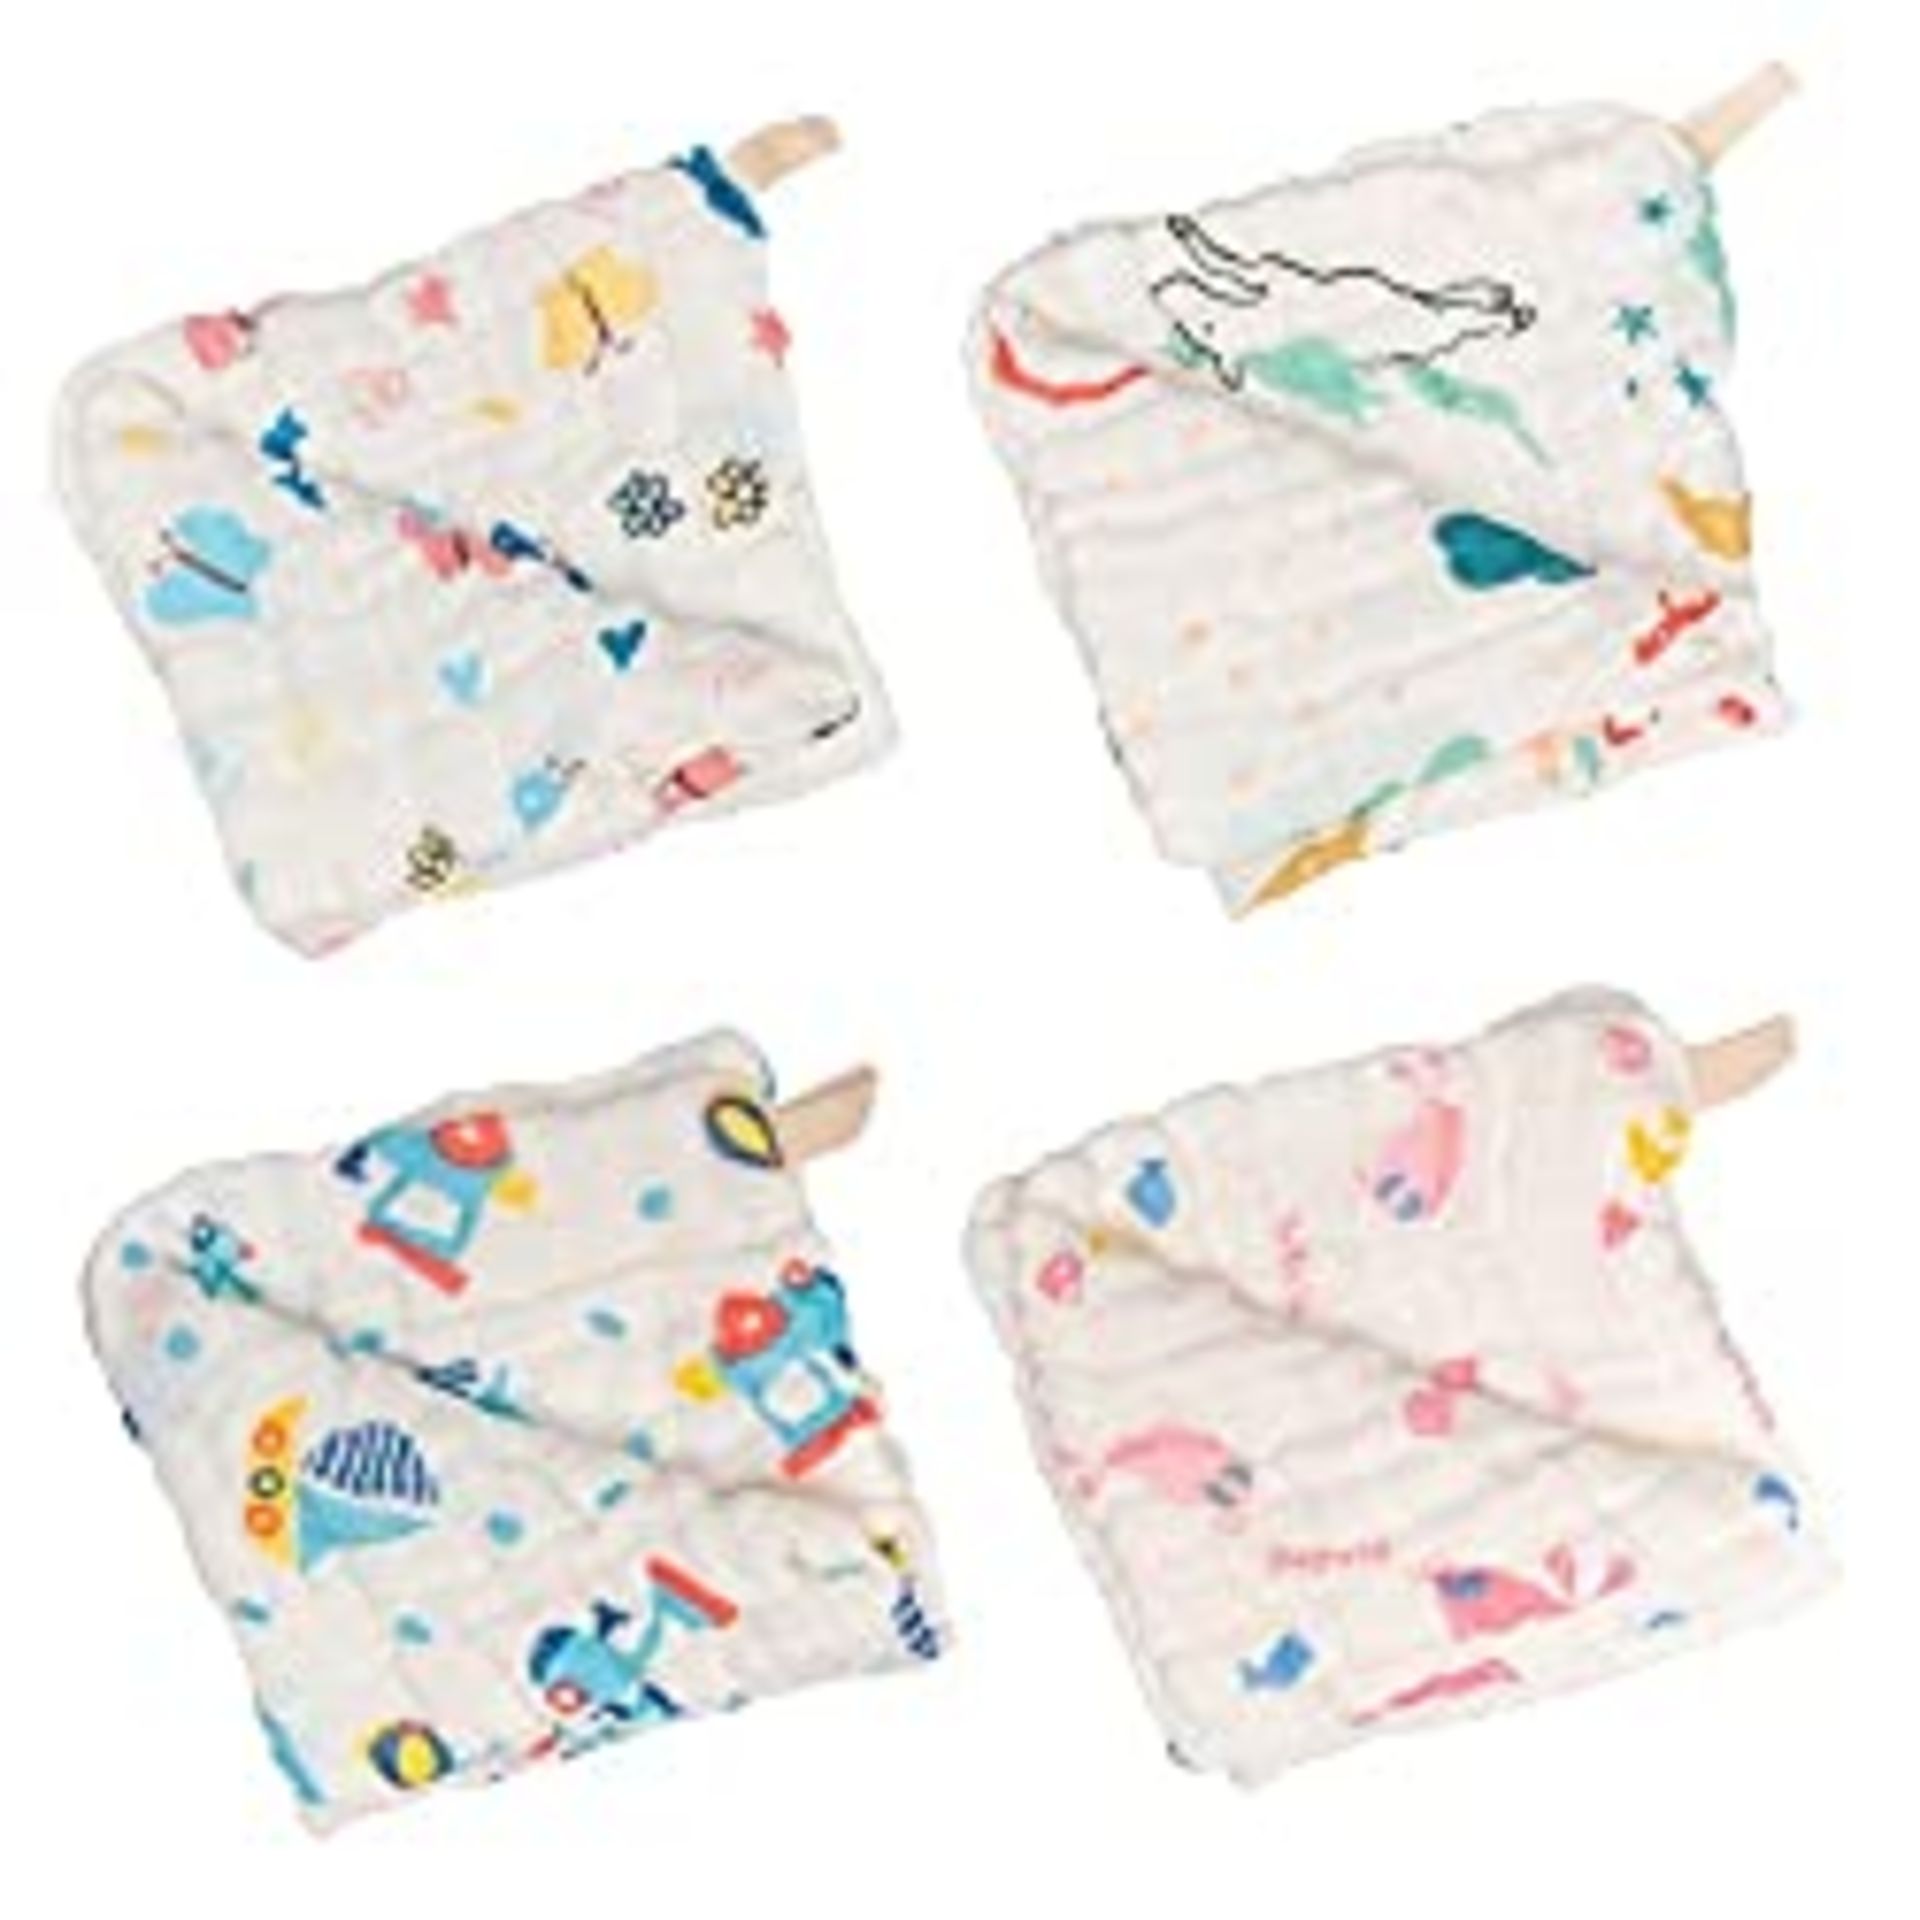 RRP £10.85 Chuckle - 12 Extra Soft 6 Layered Muslin Squares for Babies - 30x30cm.